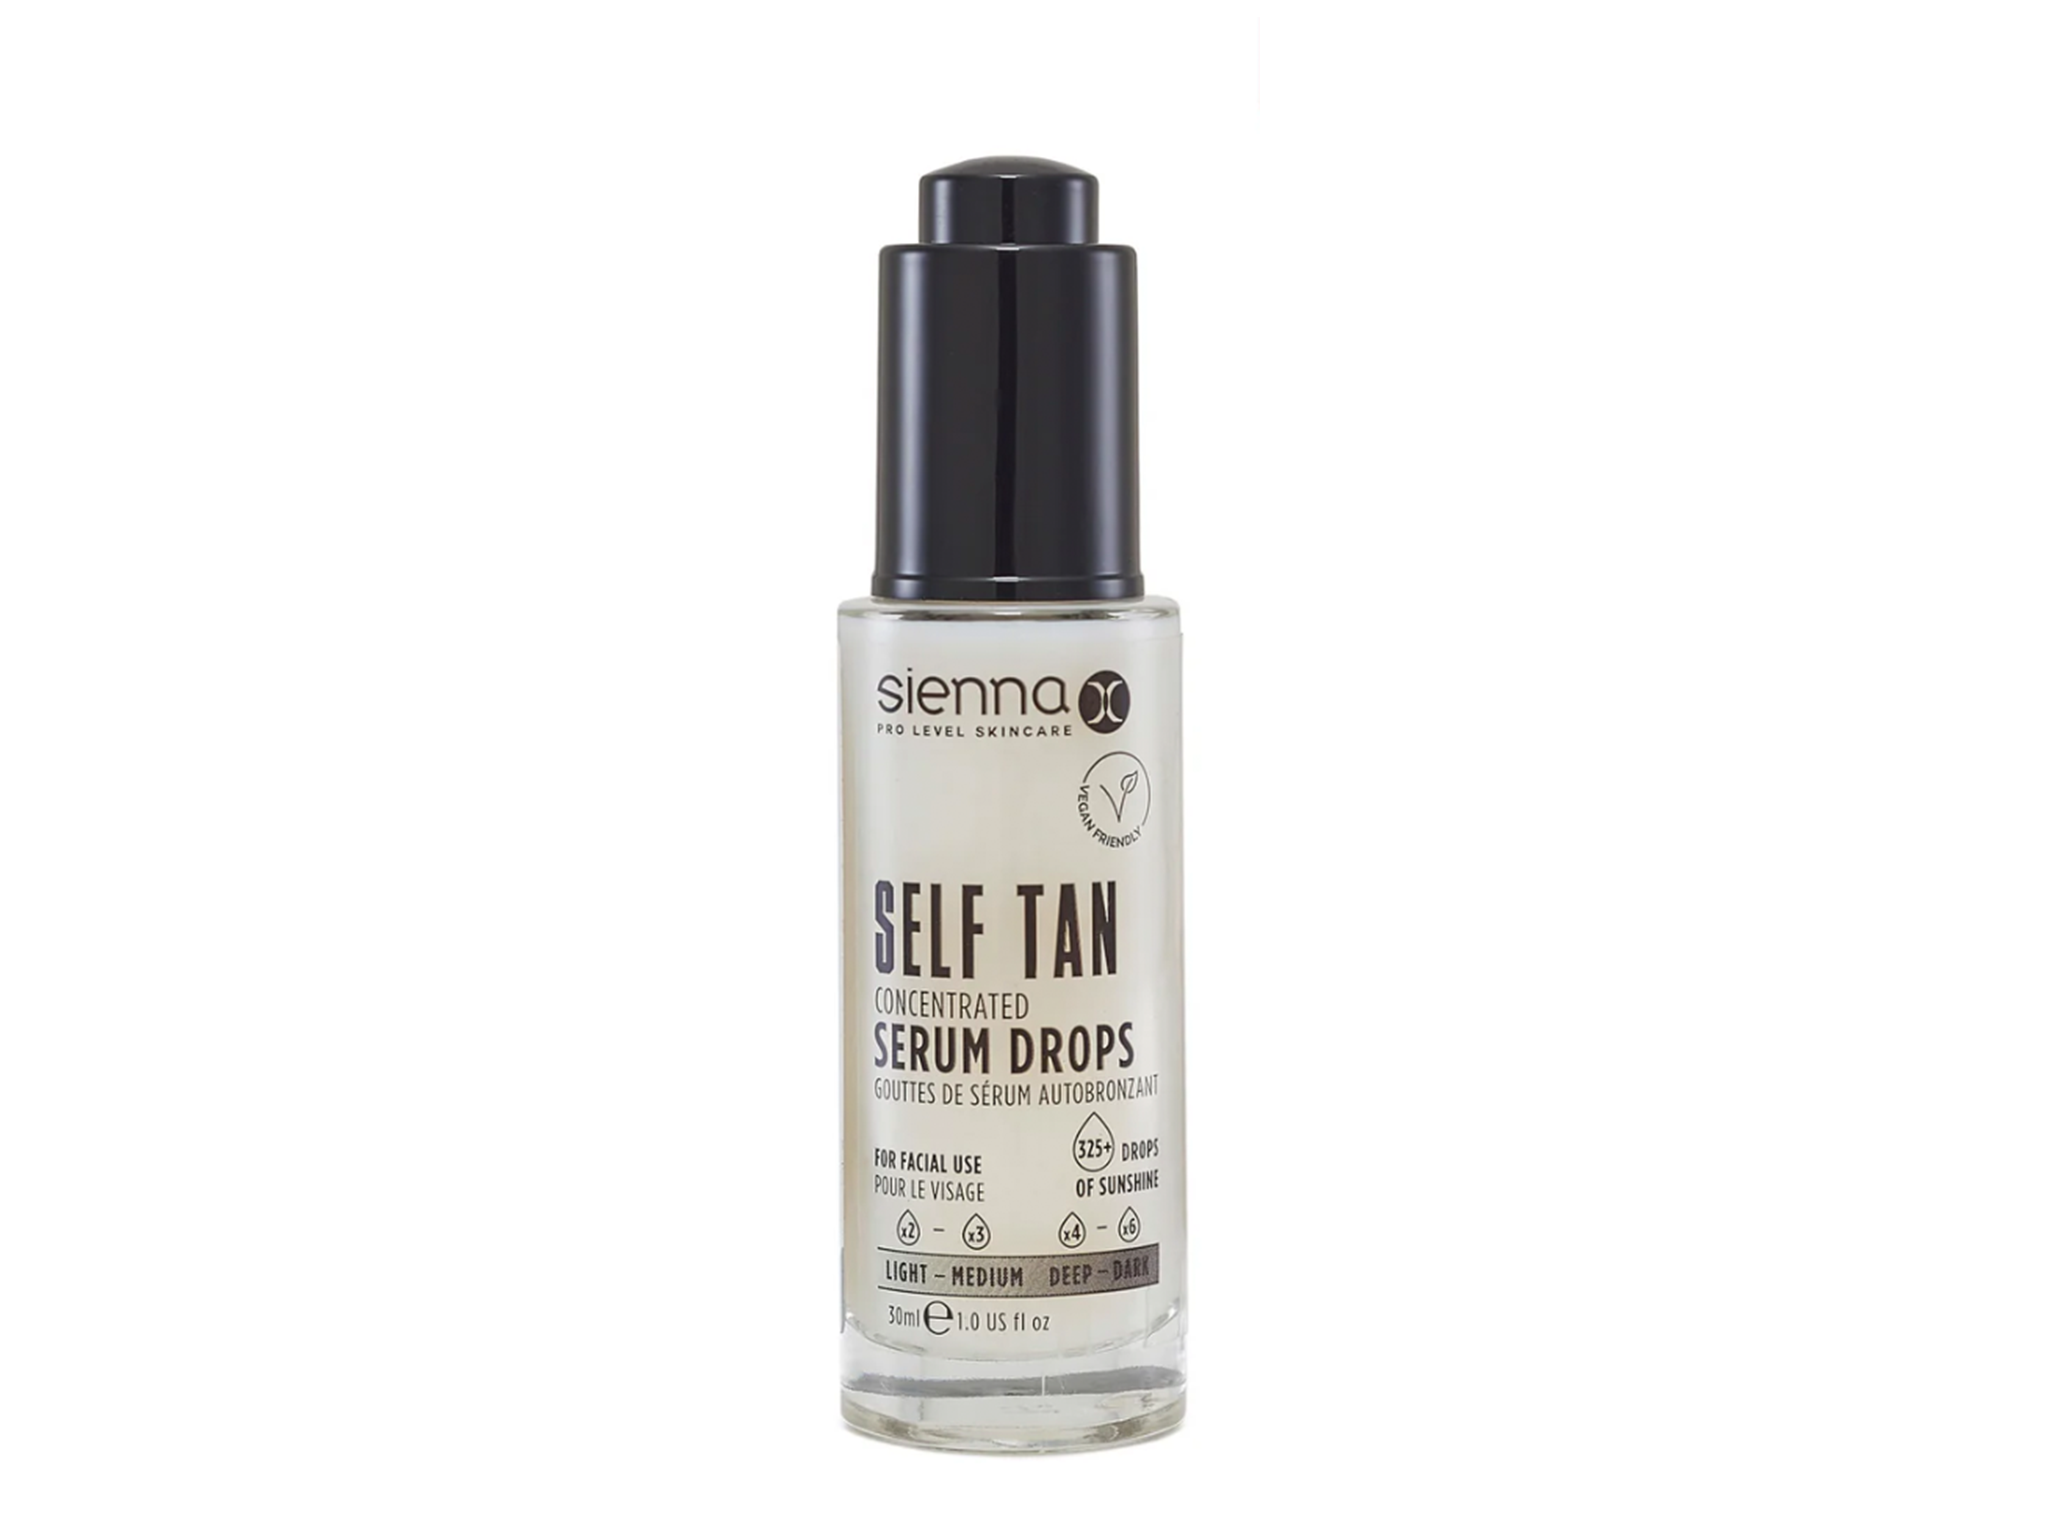 Sienna X self tan concentrated serum drops